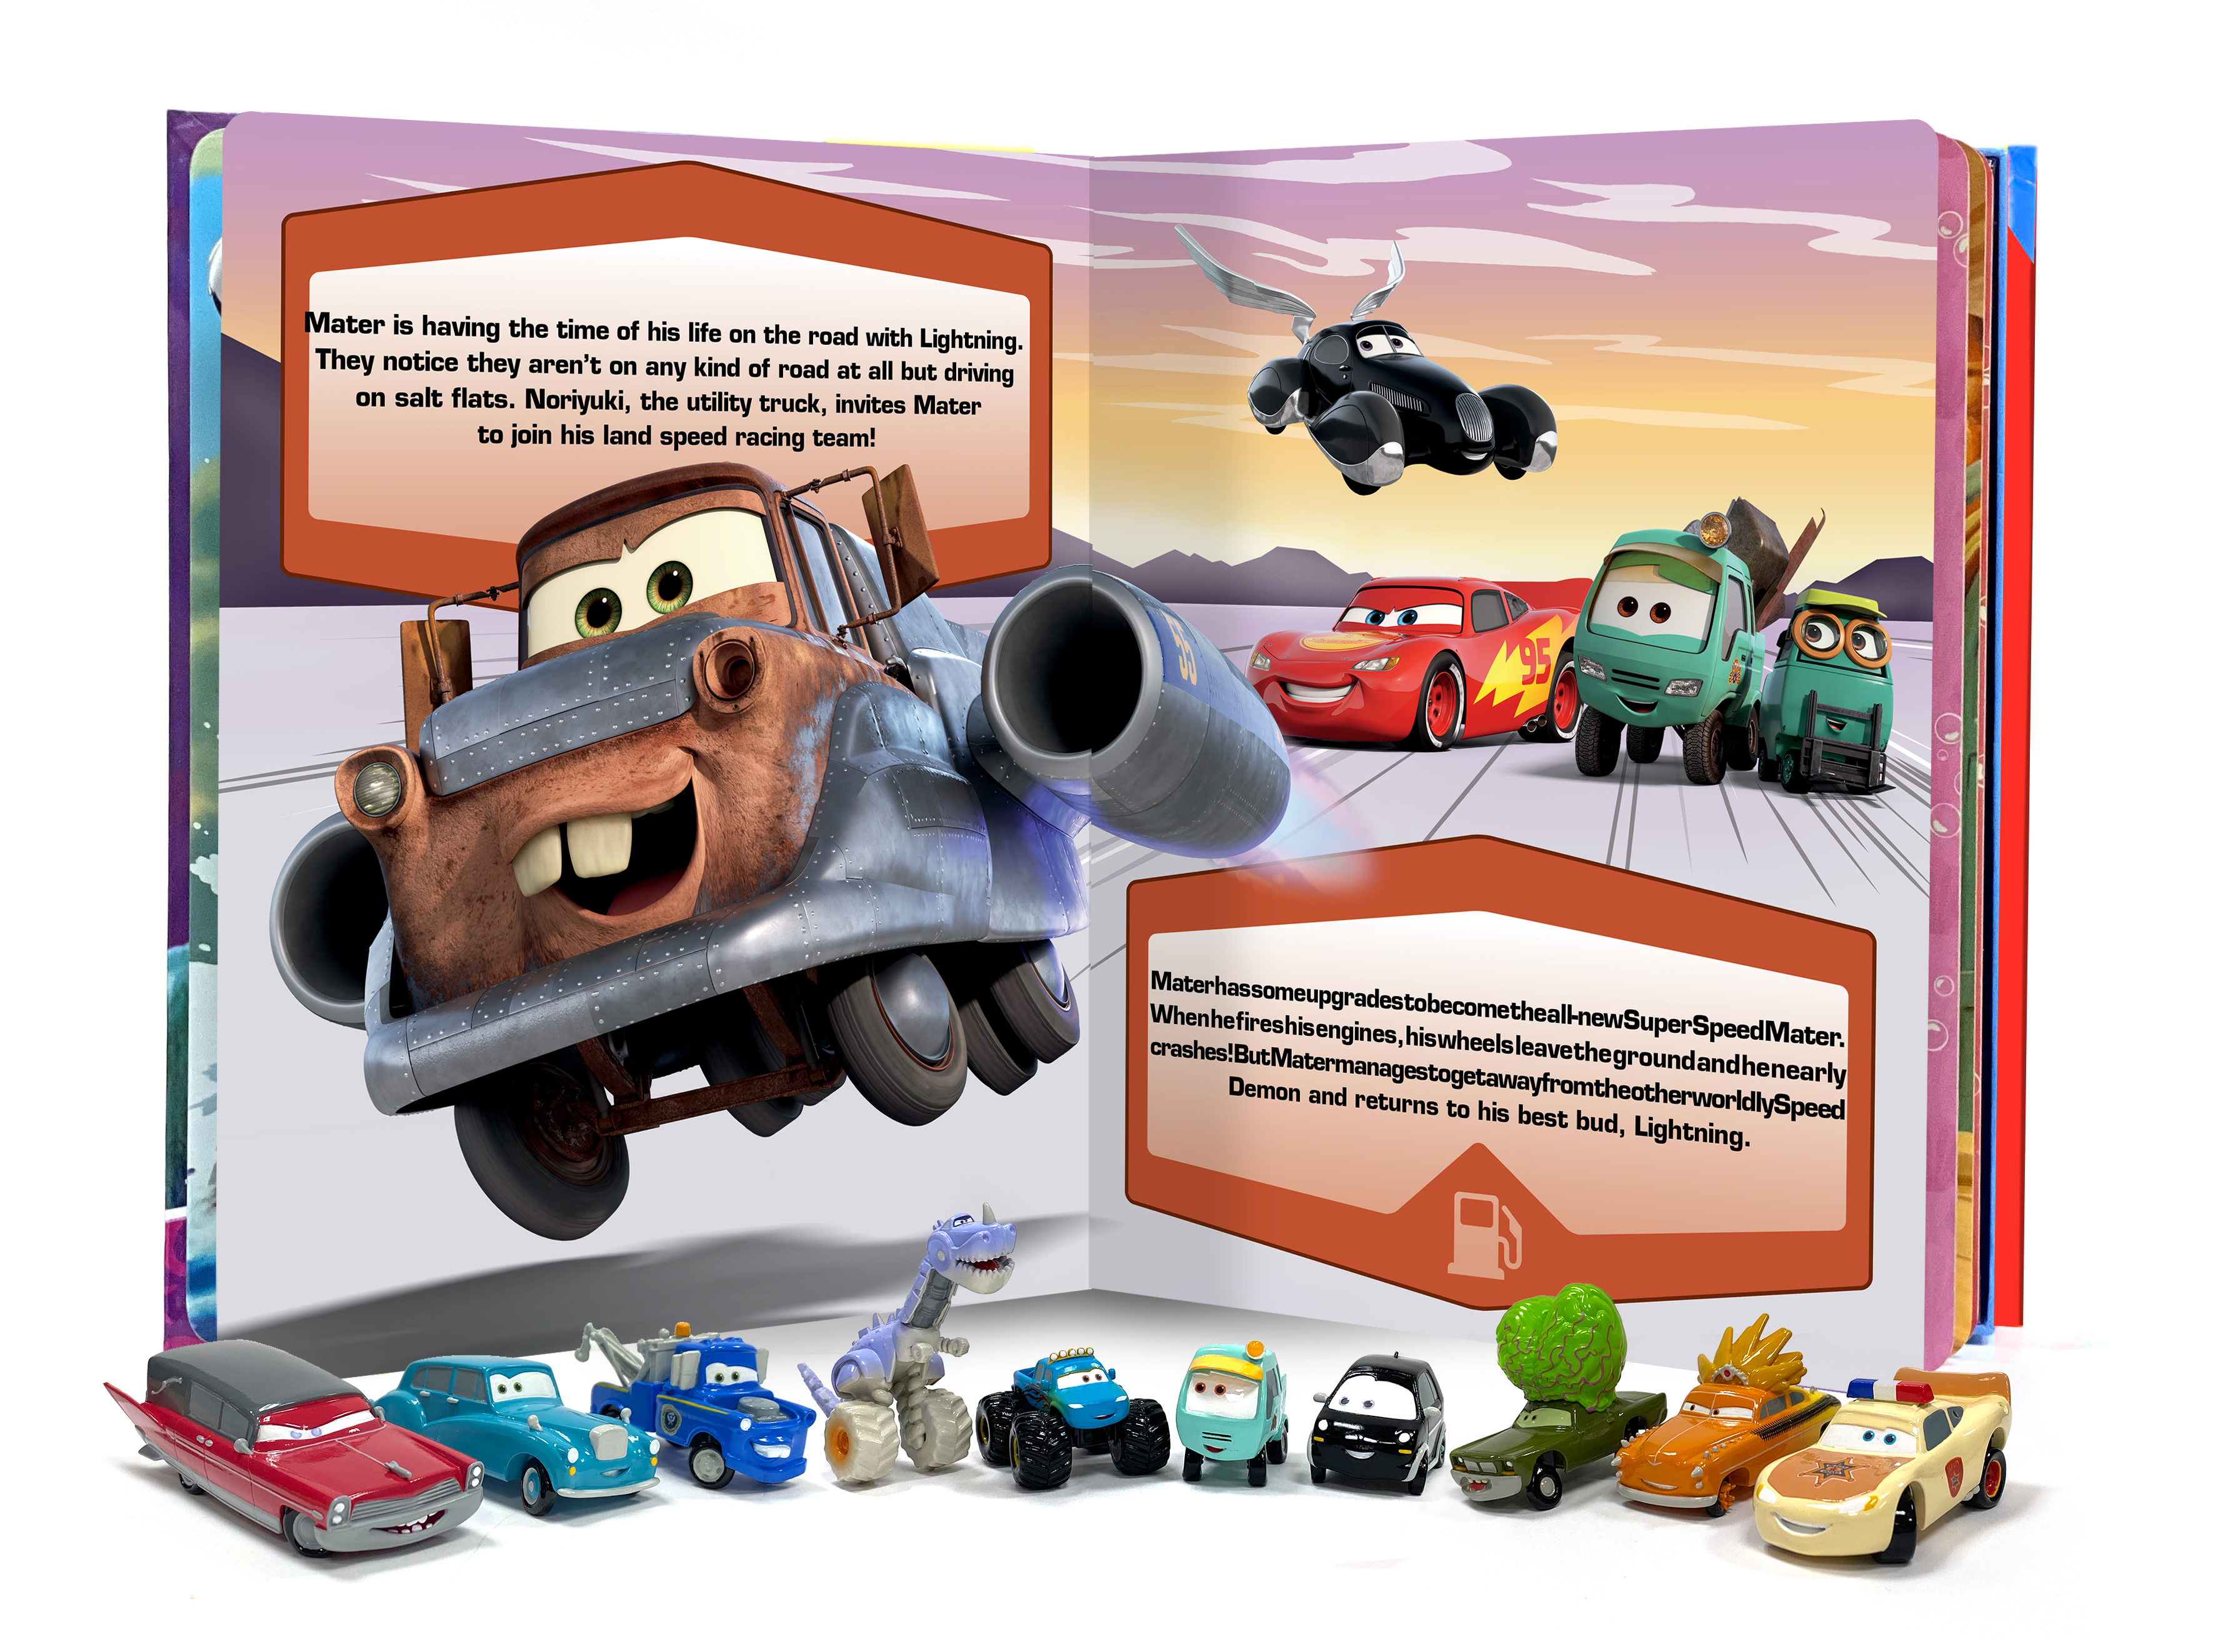 DISNEY CARS ON THE ROAD MY BUSY BOOKS